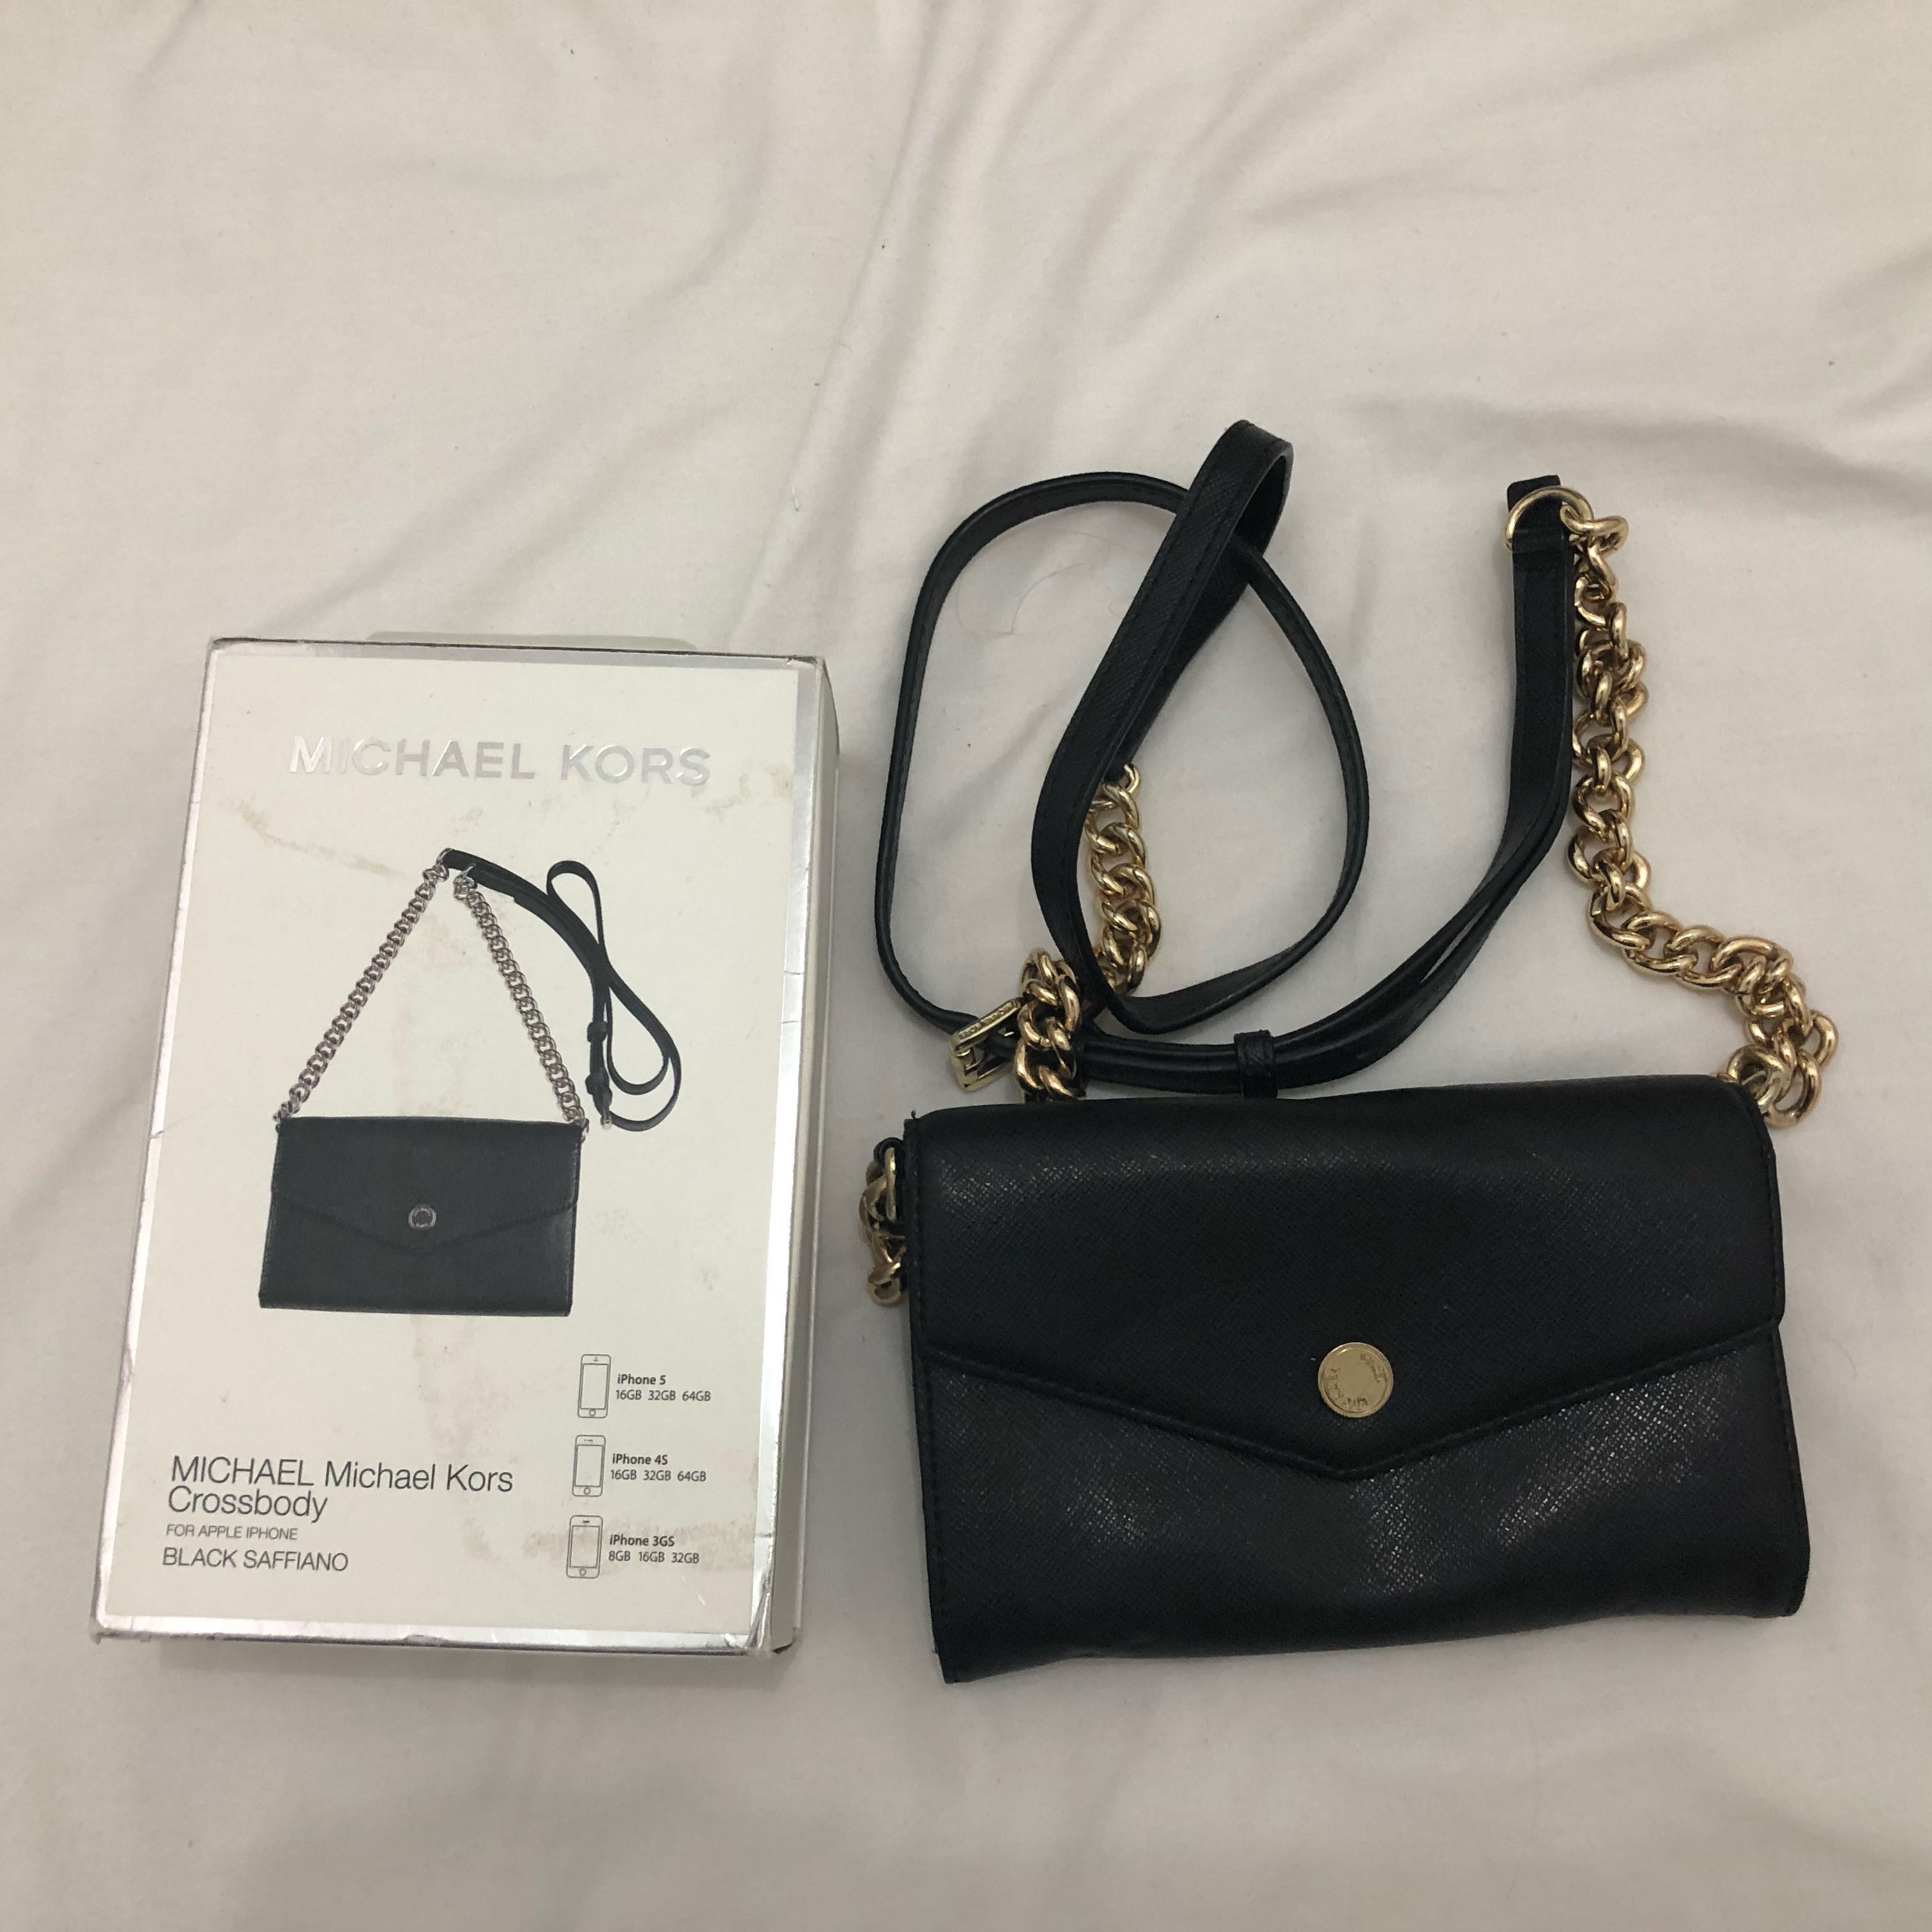 Genuine Michael Kors Crossbody Bag Black Saffiano Leather for Iphone 5/4/3GS,  Women's Fashion, Bags & Wallets, Cross-body Bags on Carousell